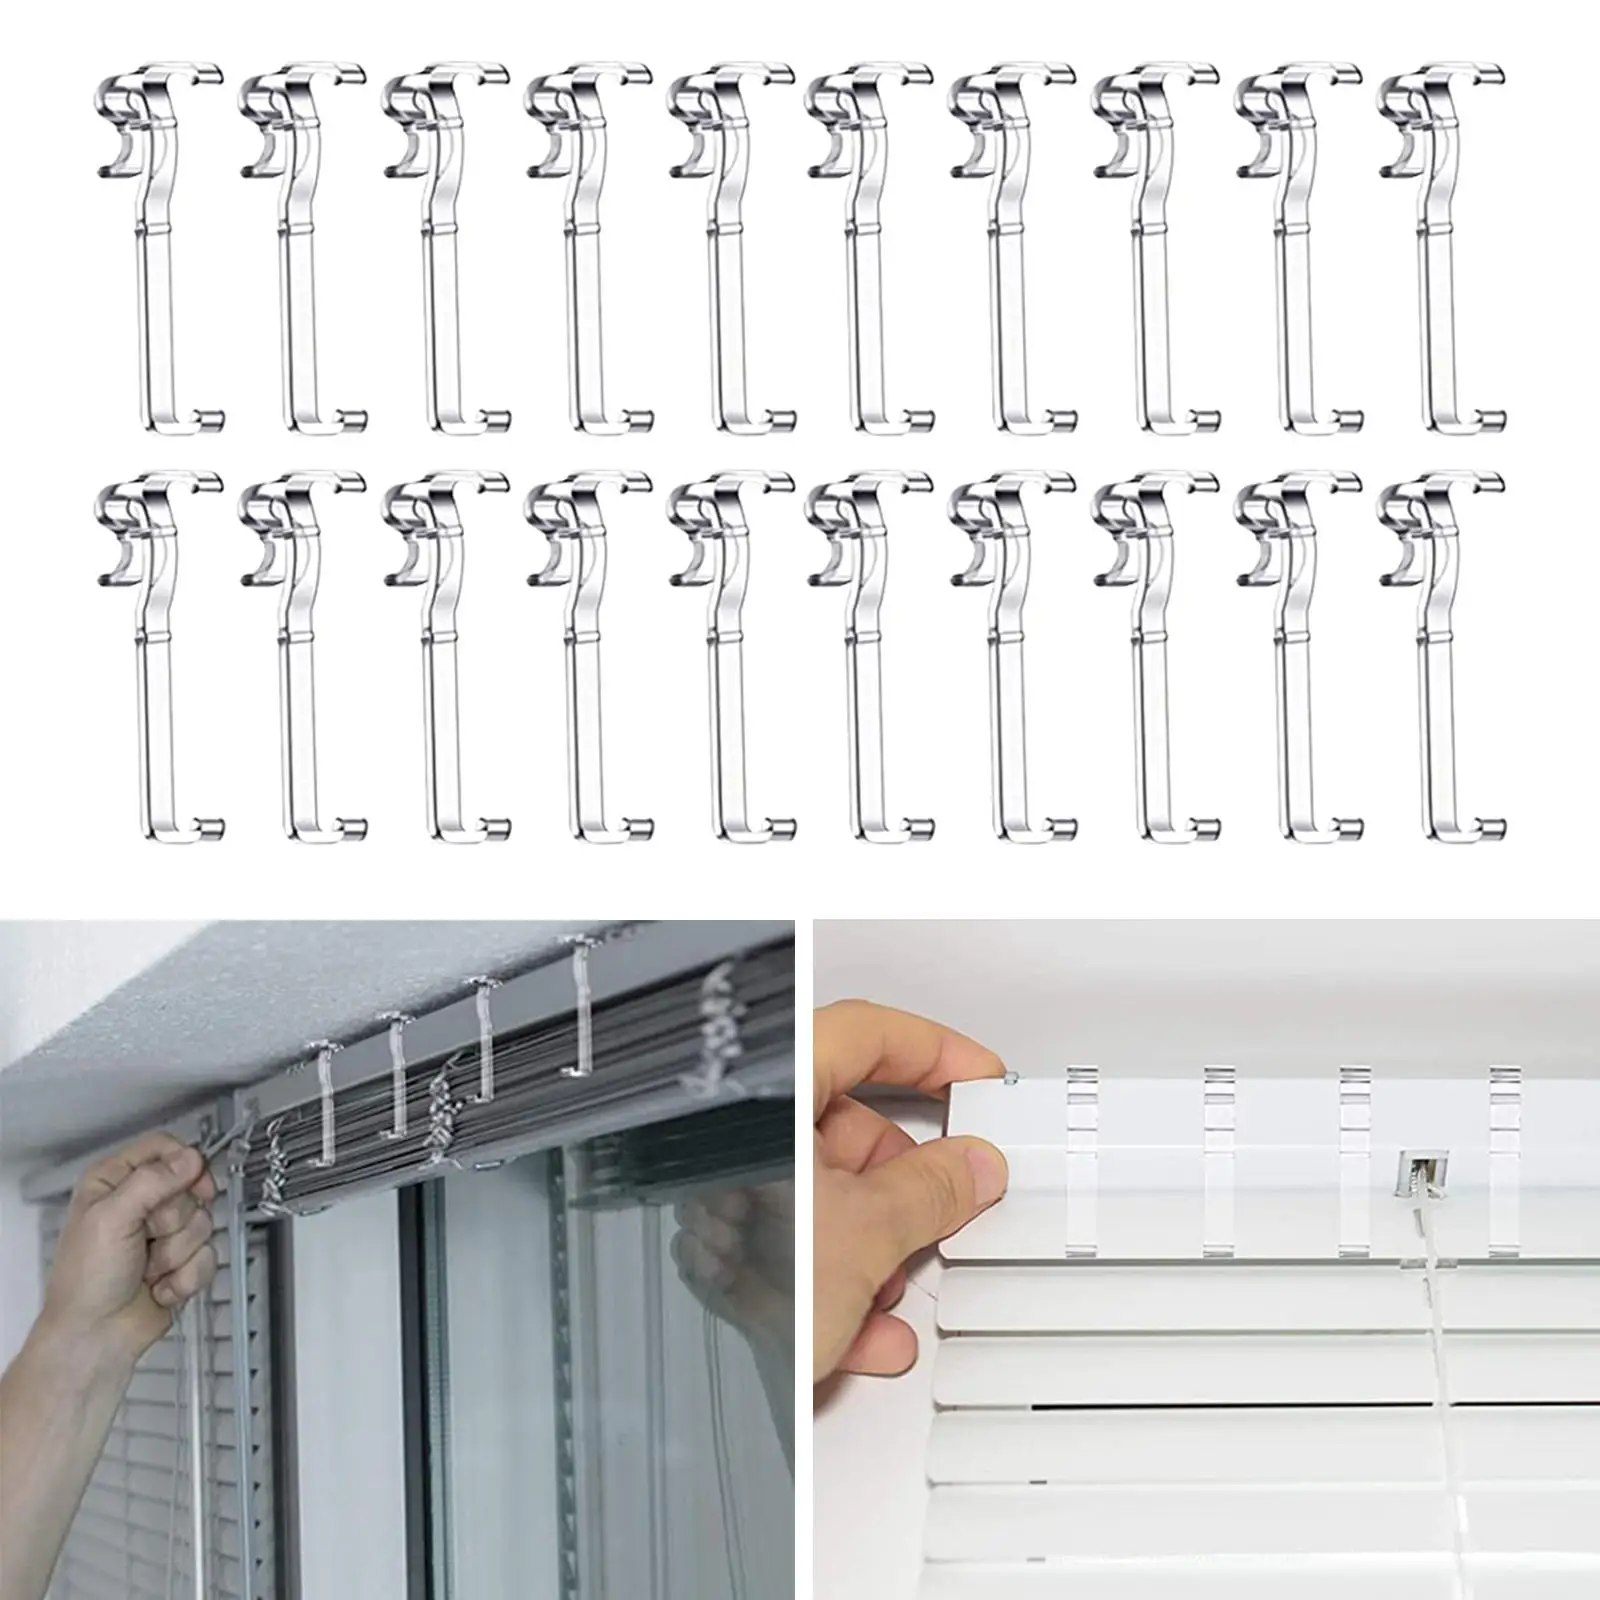 20 Pcs Valance Clips Transparent Blind Clips Replacements Retainer Clip Holder Plastic for Home Vertical Blinds Accessories Shop